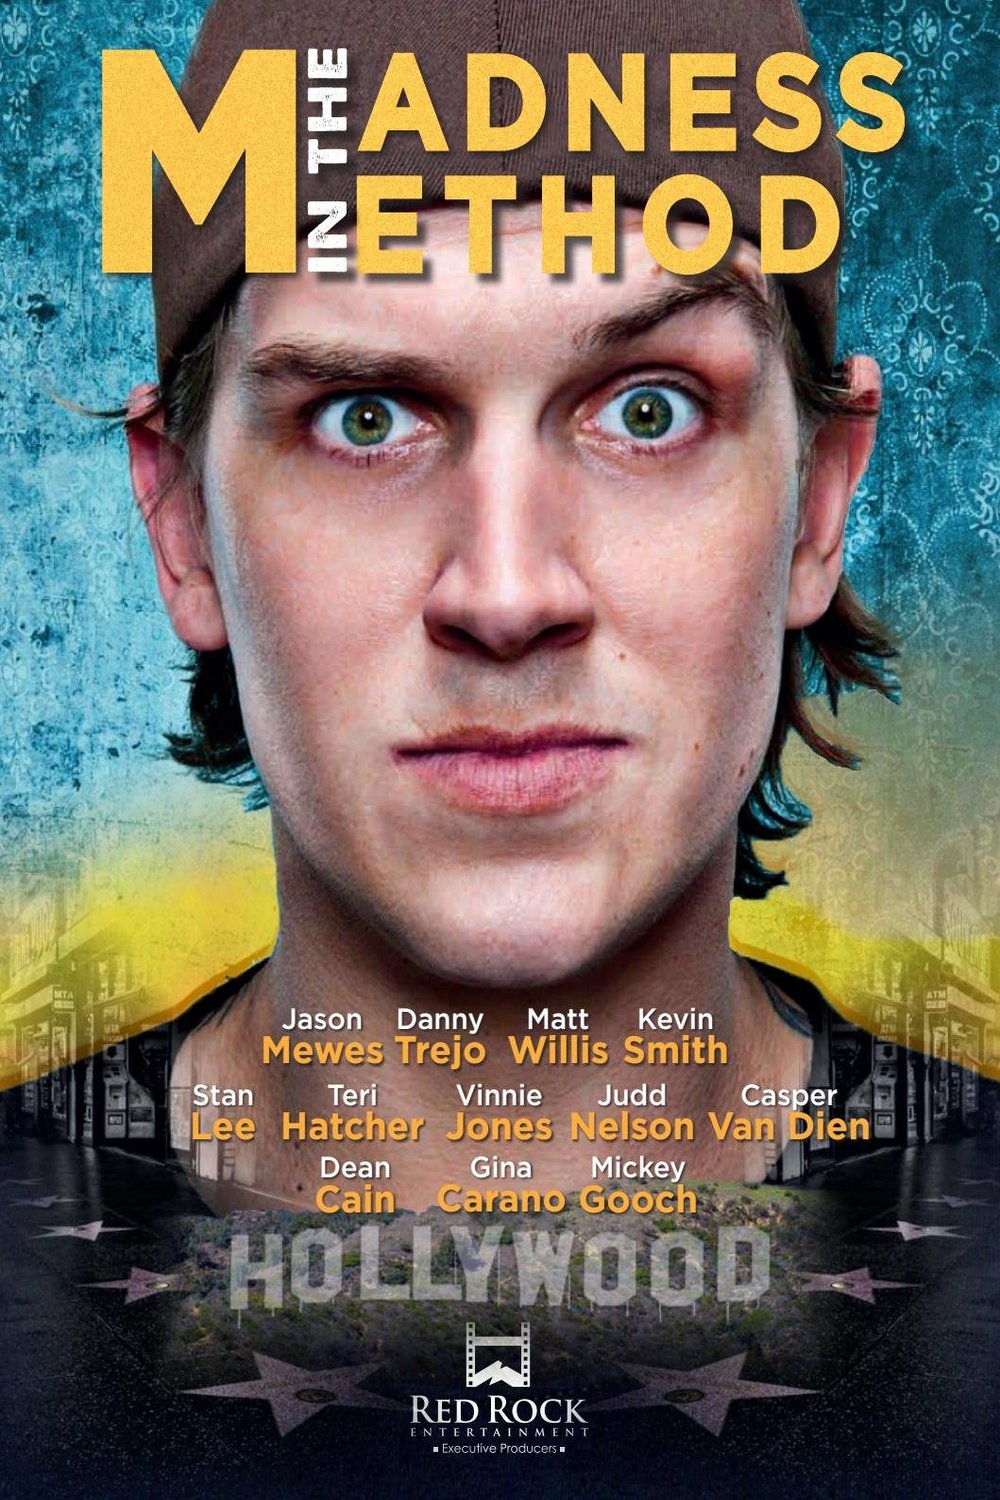 Poster of the movie Madness in the Method